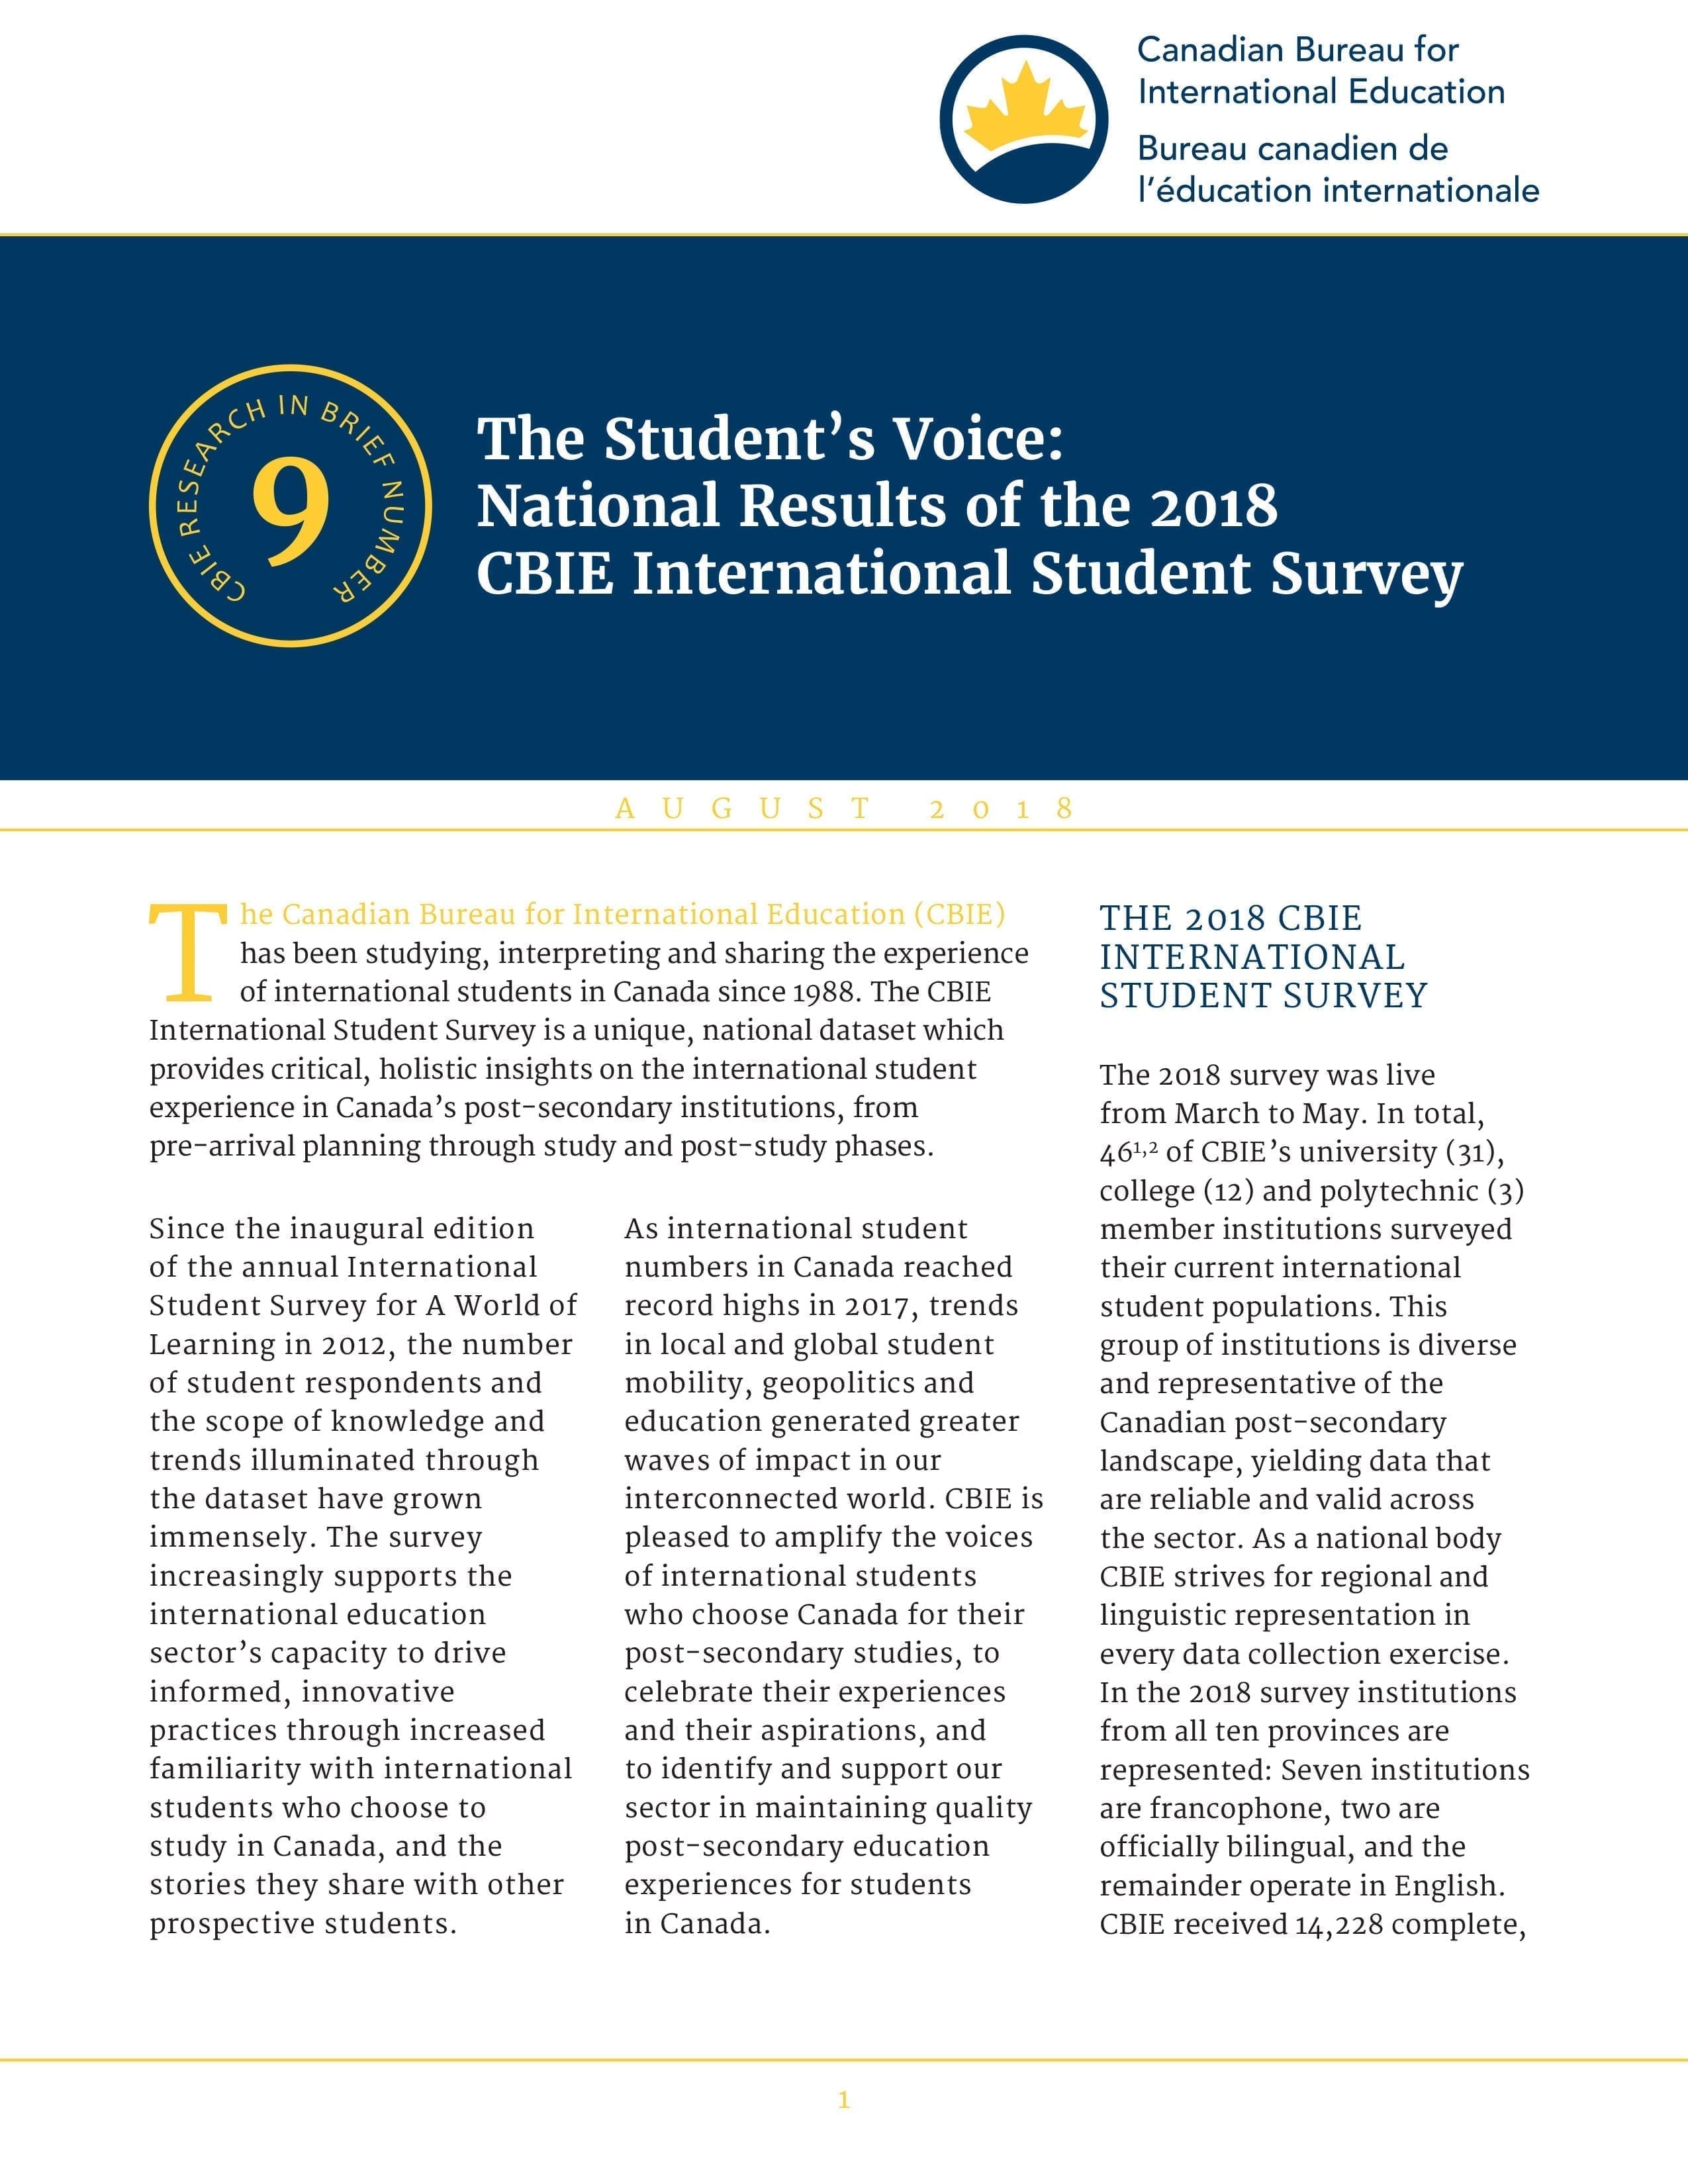 The Student’s Voice: National Results of the 2018 CBIE International Student Survey